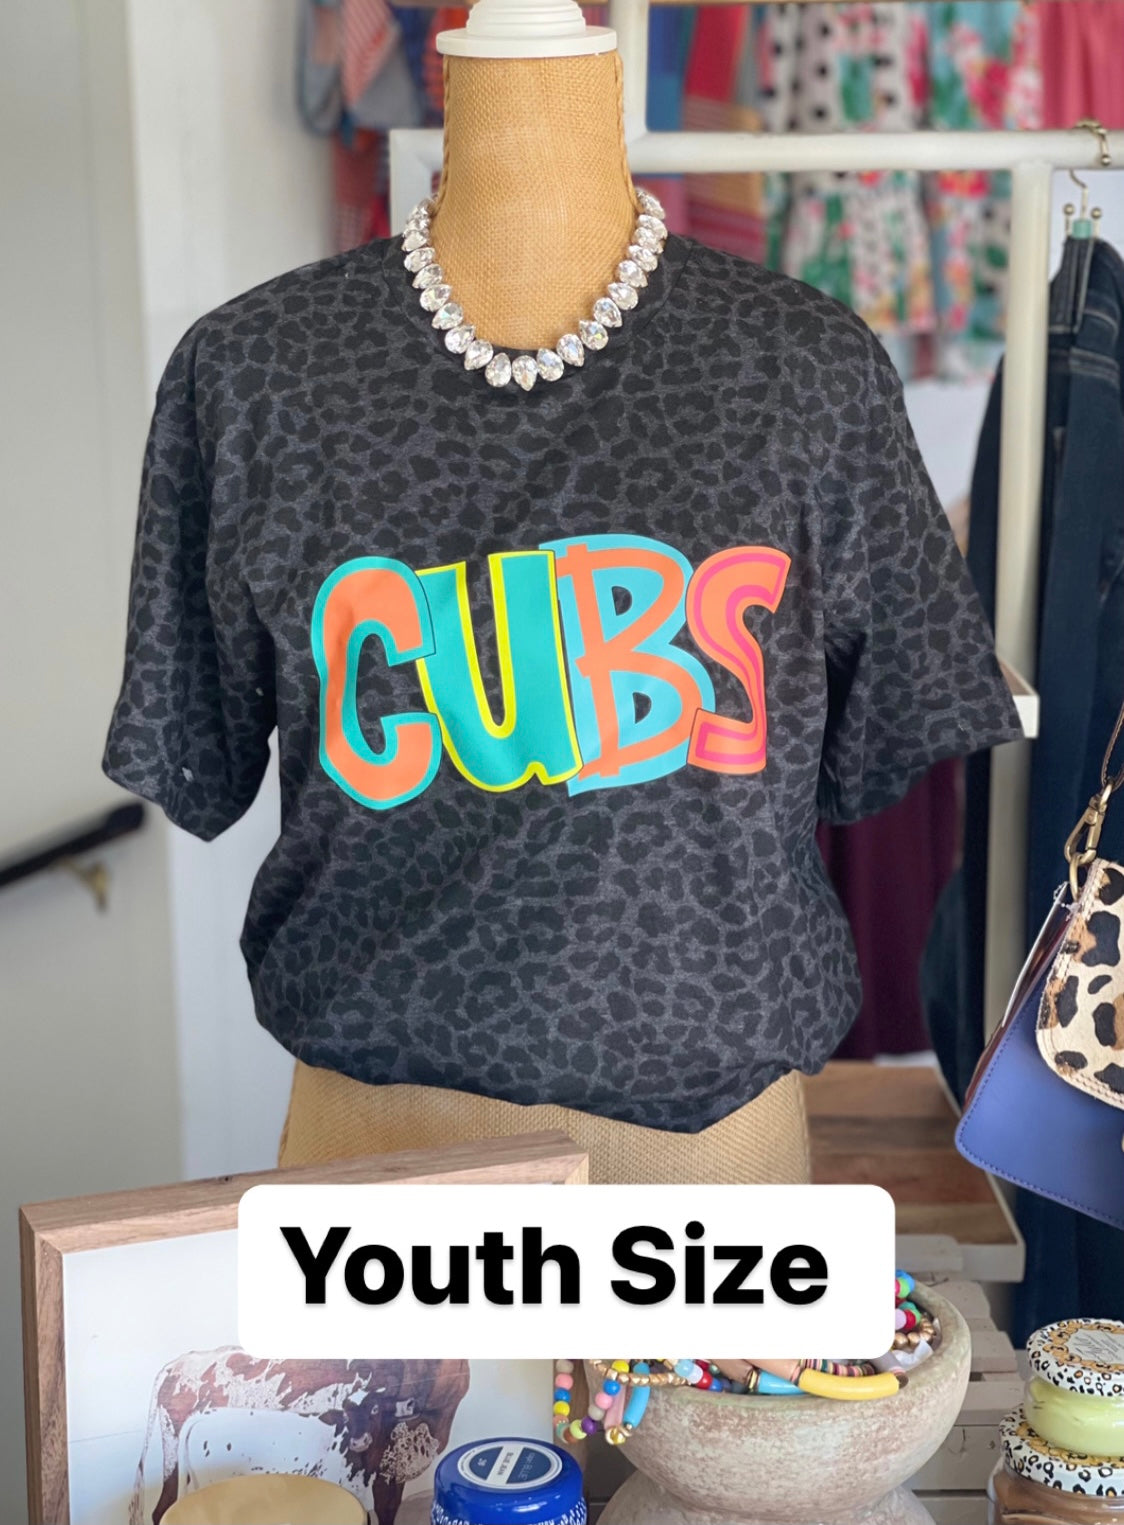 Cubs Pride - Youth